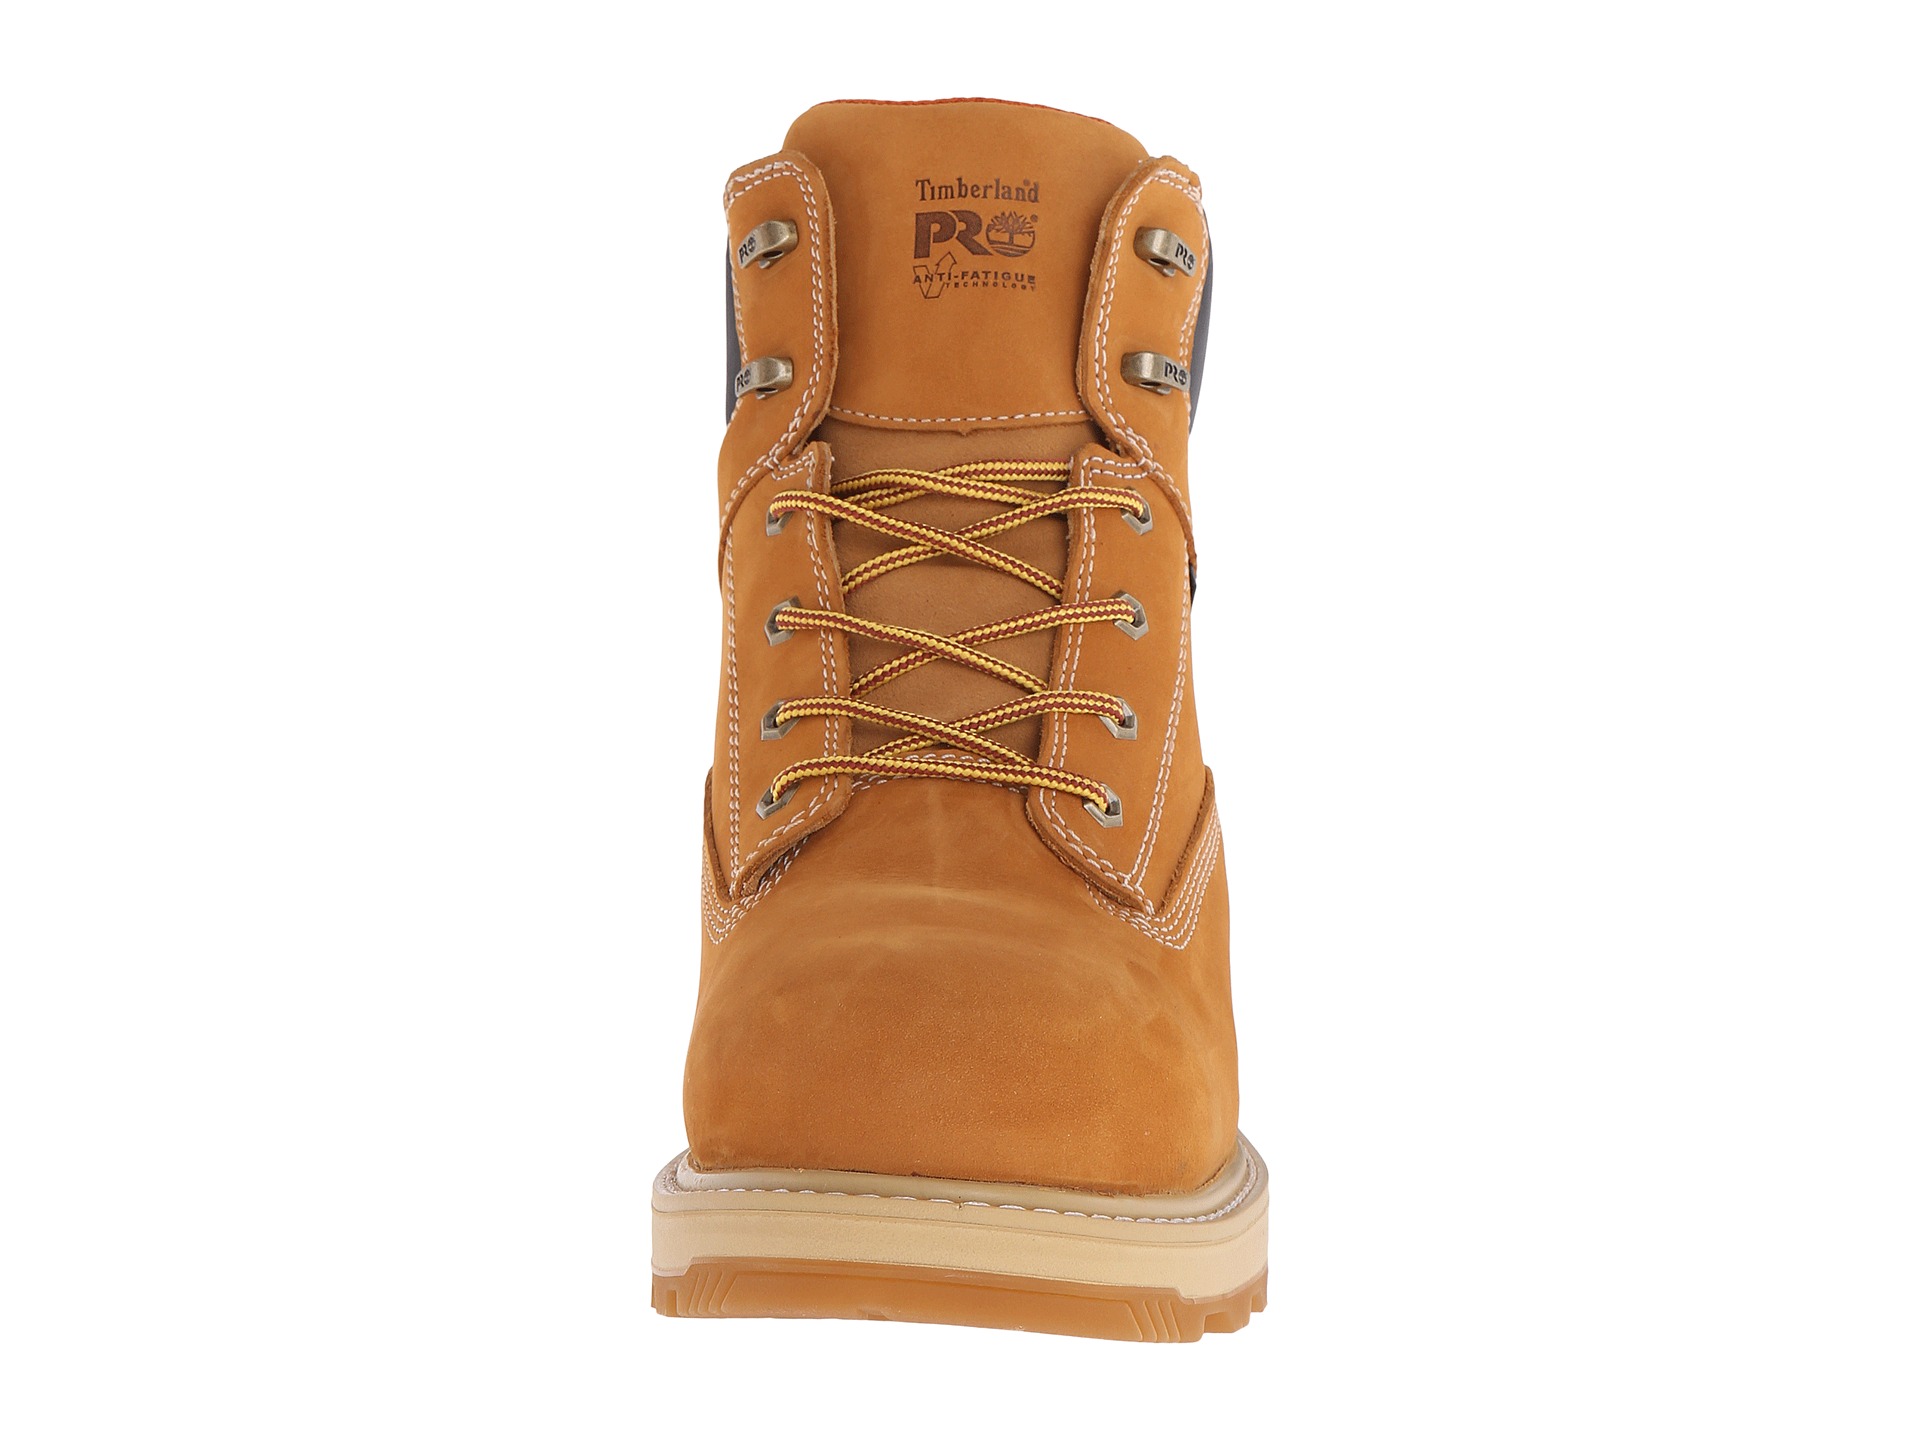 Timberland PRO 6 Resistor Composite Safety Toe Waterproof Insulated Boot